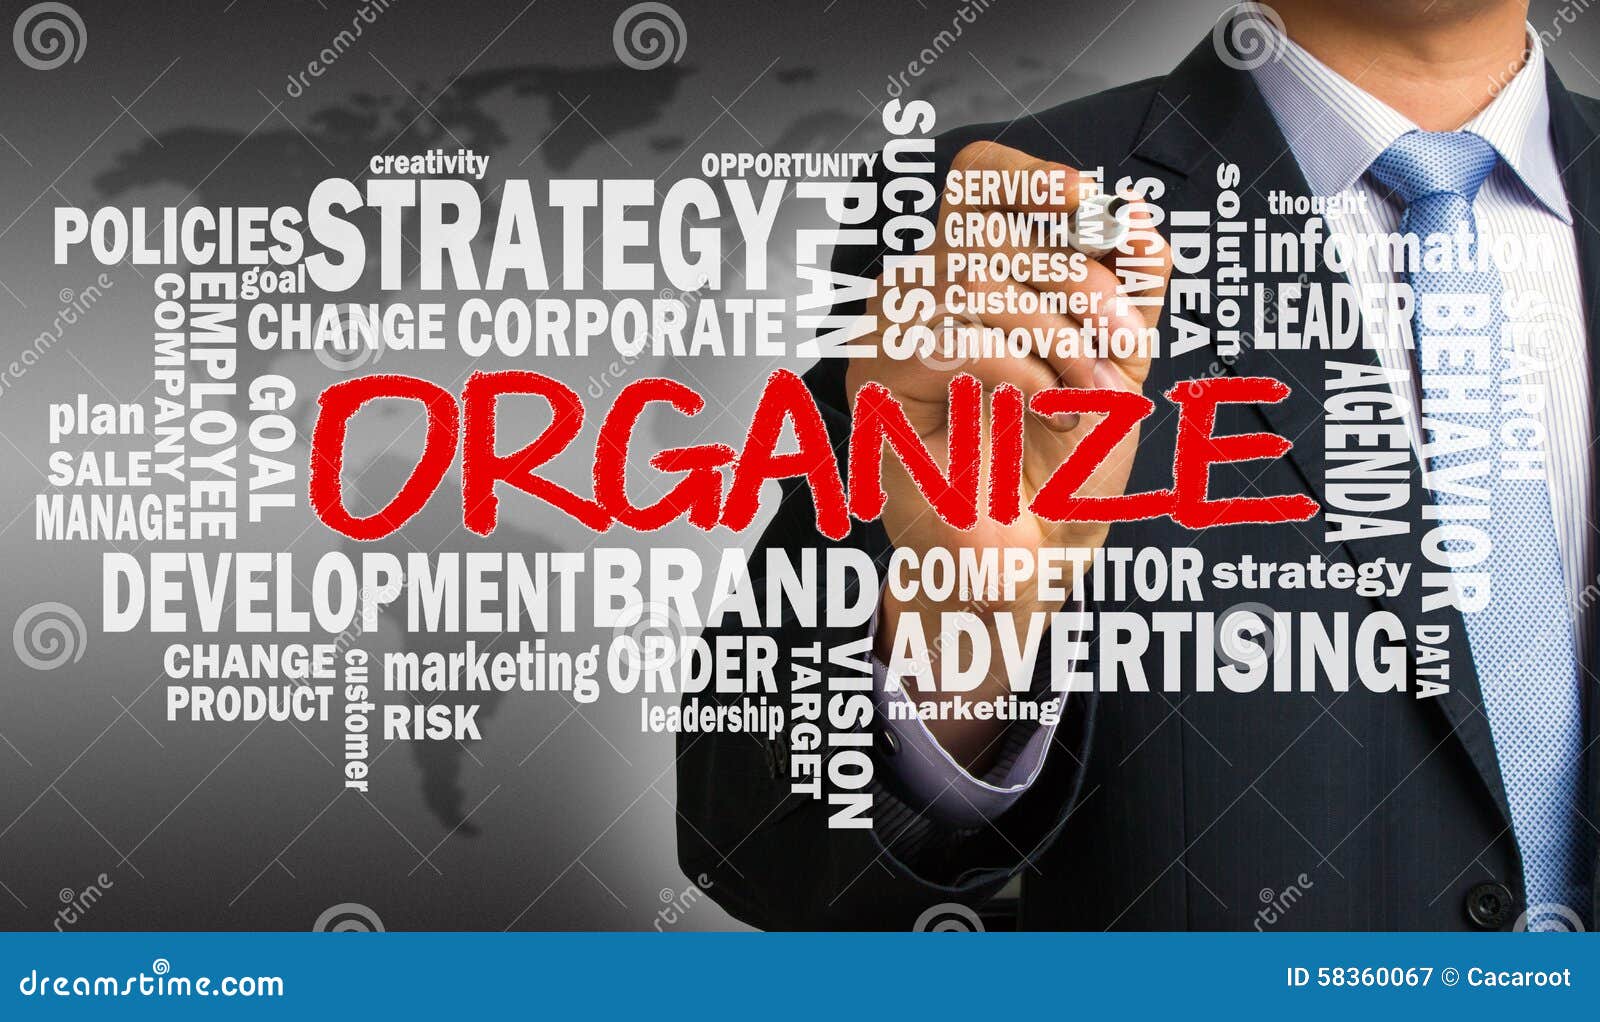 Organize Word Meaning Organizing Manage And Management Stock Photo, Picture  and Royalty Free Image. Image 45130505.